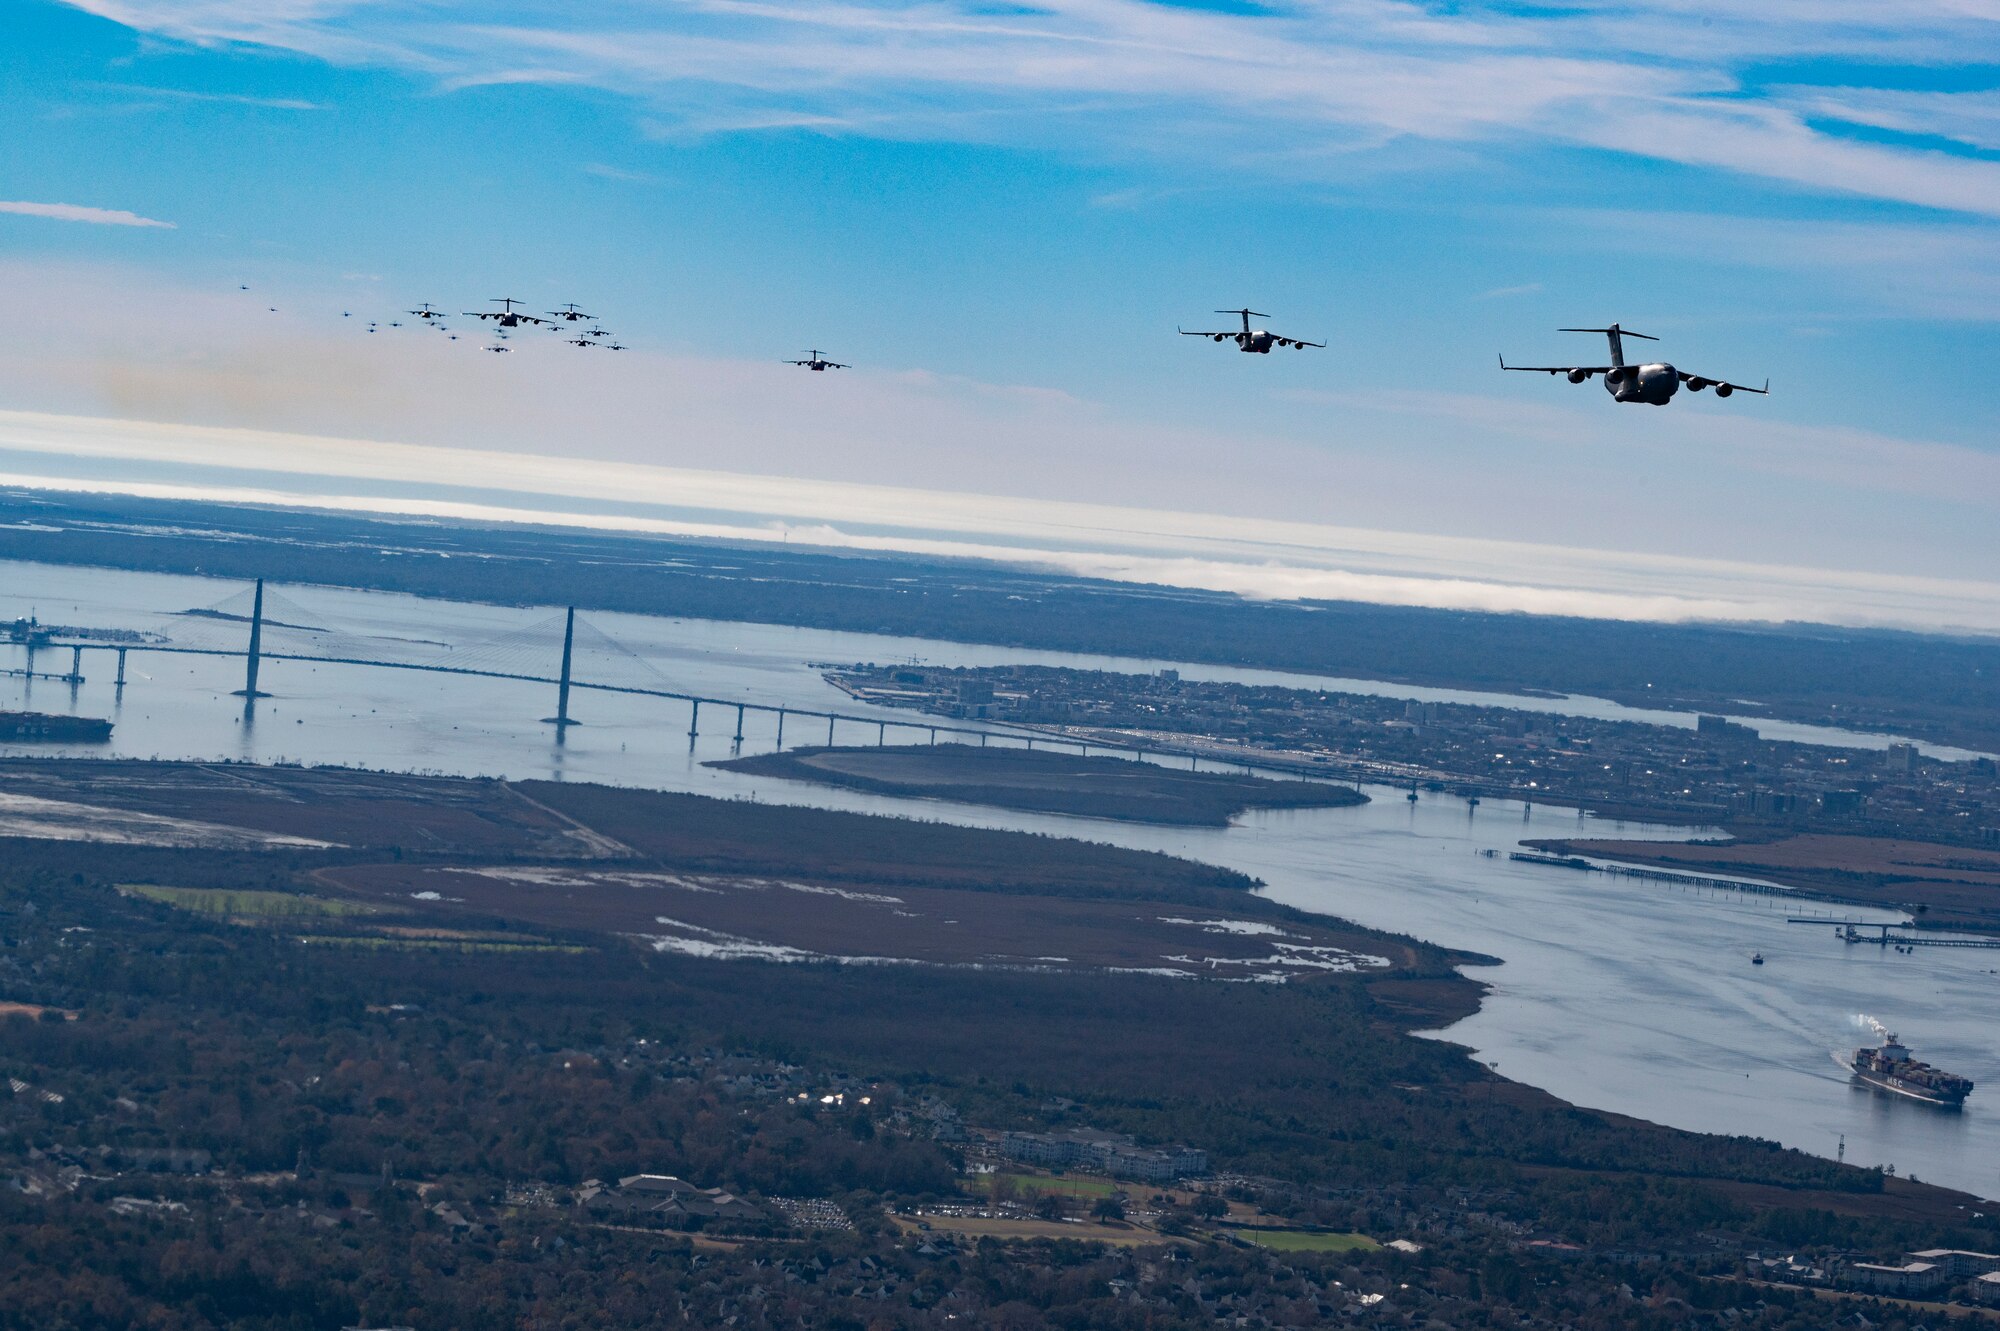 C-17 Globemaster III’s assigned to the 437th Airlift Wing fly over Charleston, South Carolina for a mass generation exercise, Jan. 5, 2023. This mission generation exercise kicks off Mobility Guardian 23 and involved the launch of 24 C-17s for the largest-ever show-of-force formation flight over Charleston Harbor. After the flyover, the formation dispersed to sharpen agile combat employment concepts that leverage rapid mobility to maximize lethality. (U.S. Air Force photo by Tech. Sgt. Michael Cossaboom)